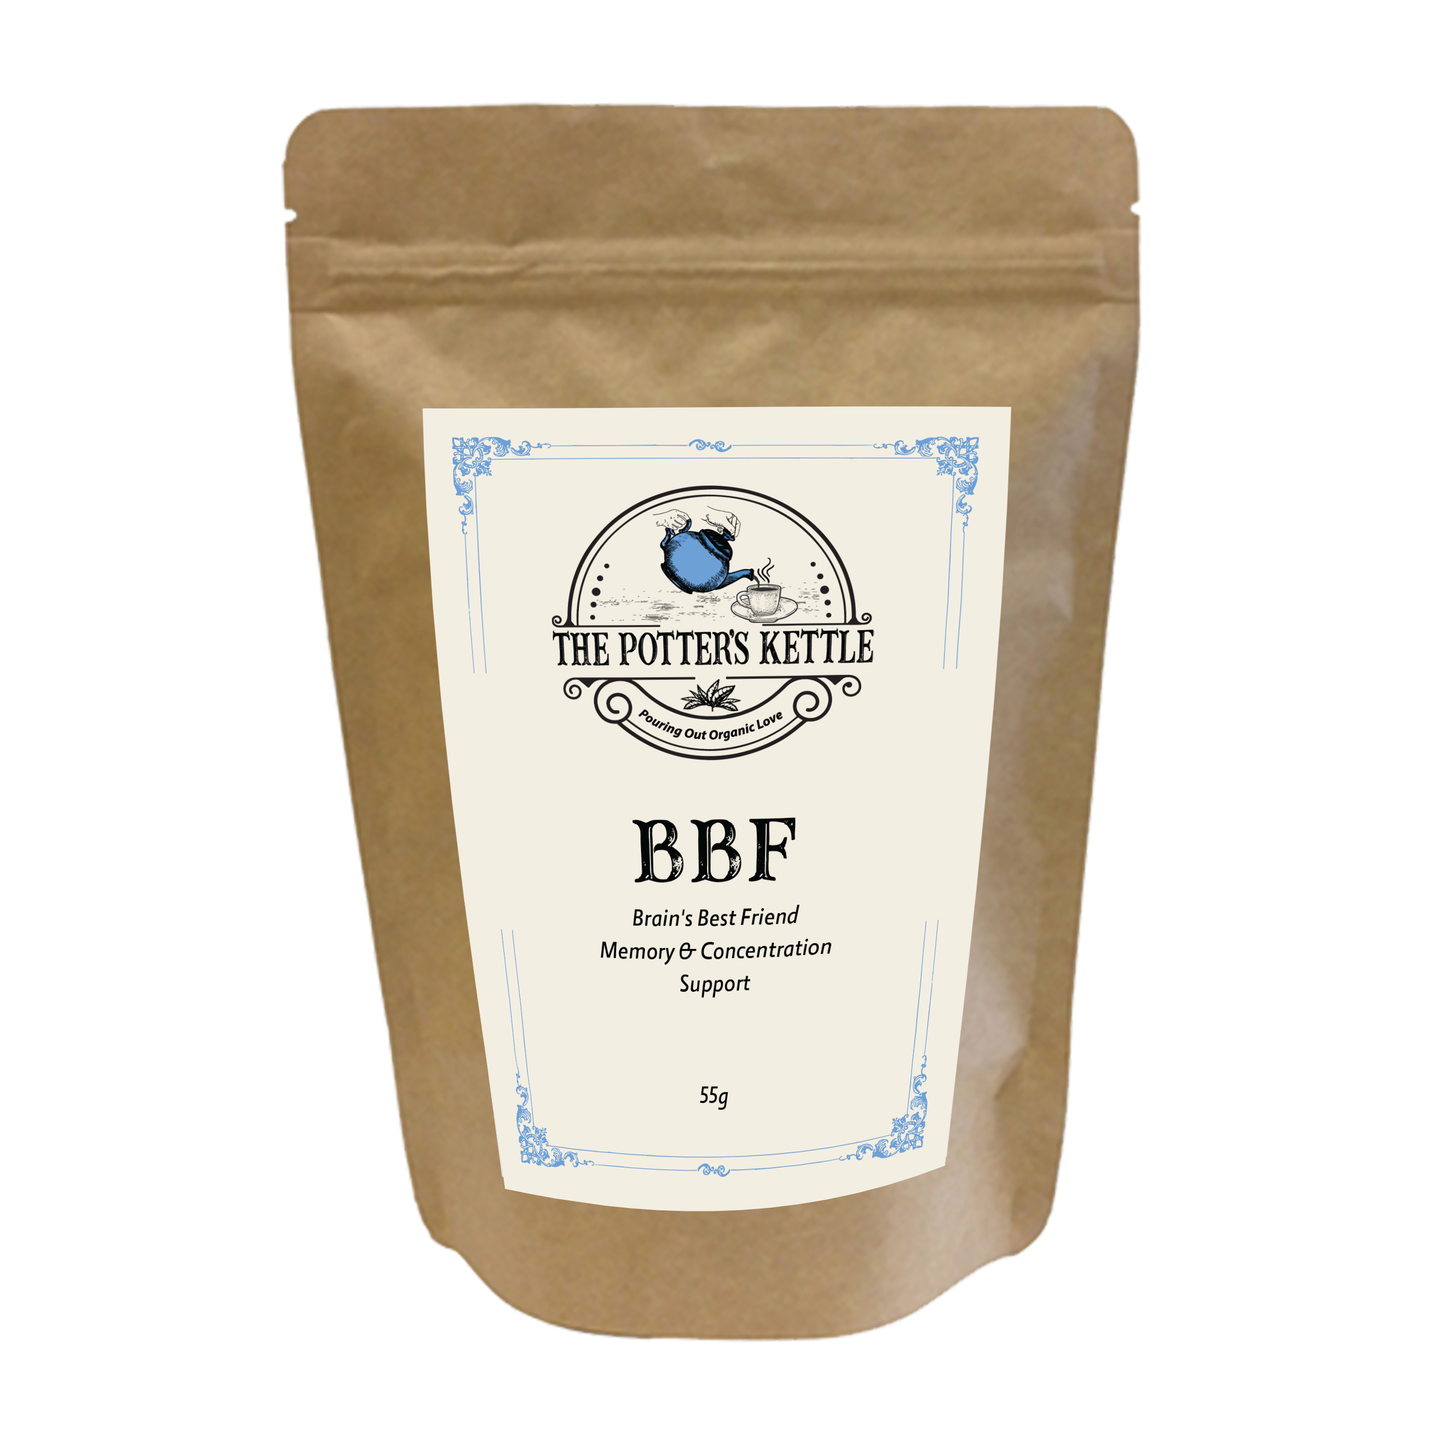 BBF; Brain's Best Friend Memory and Concentration Support